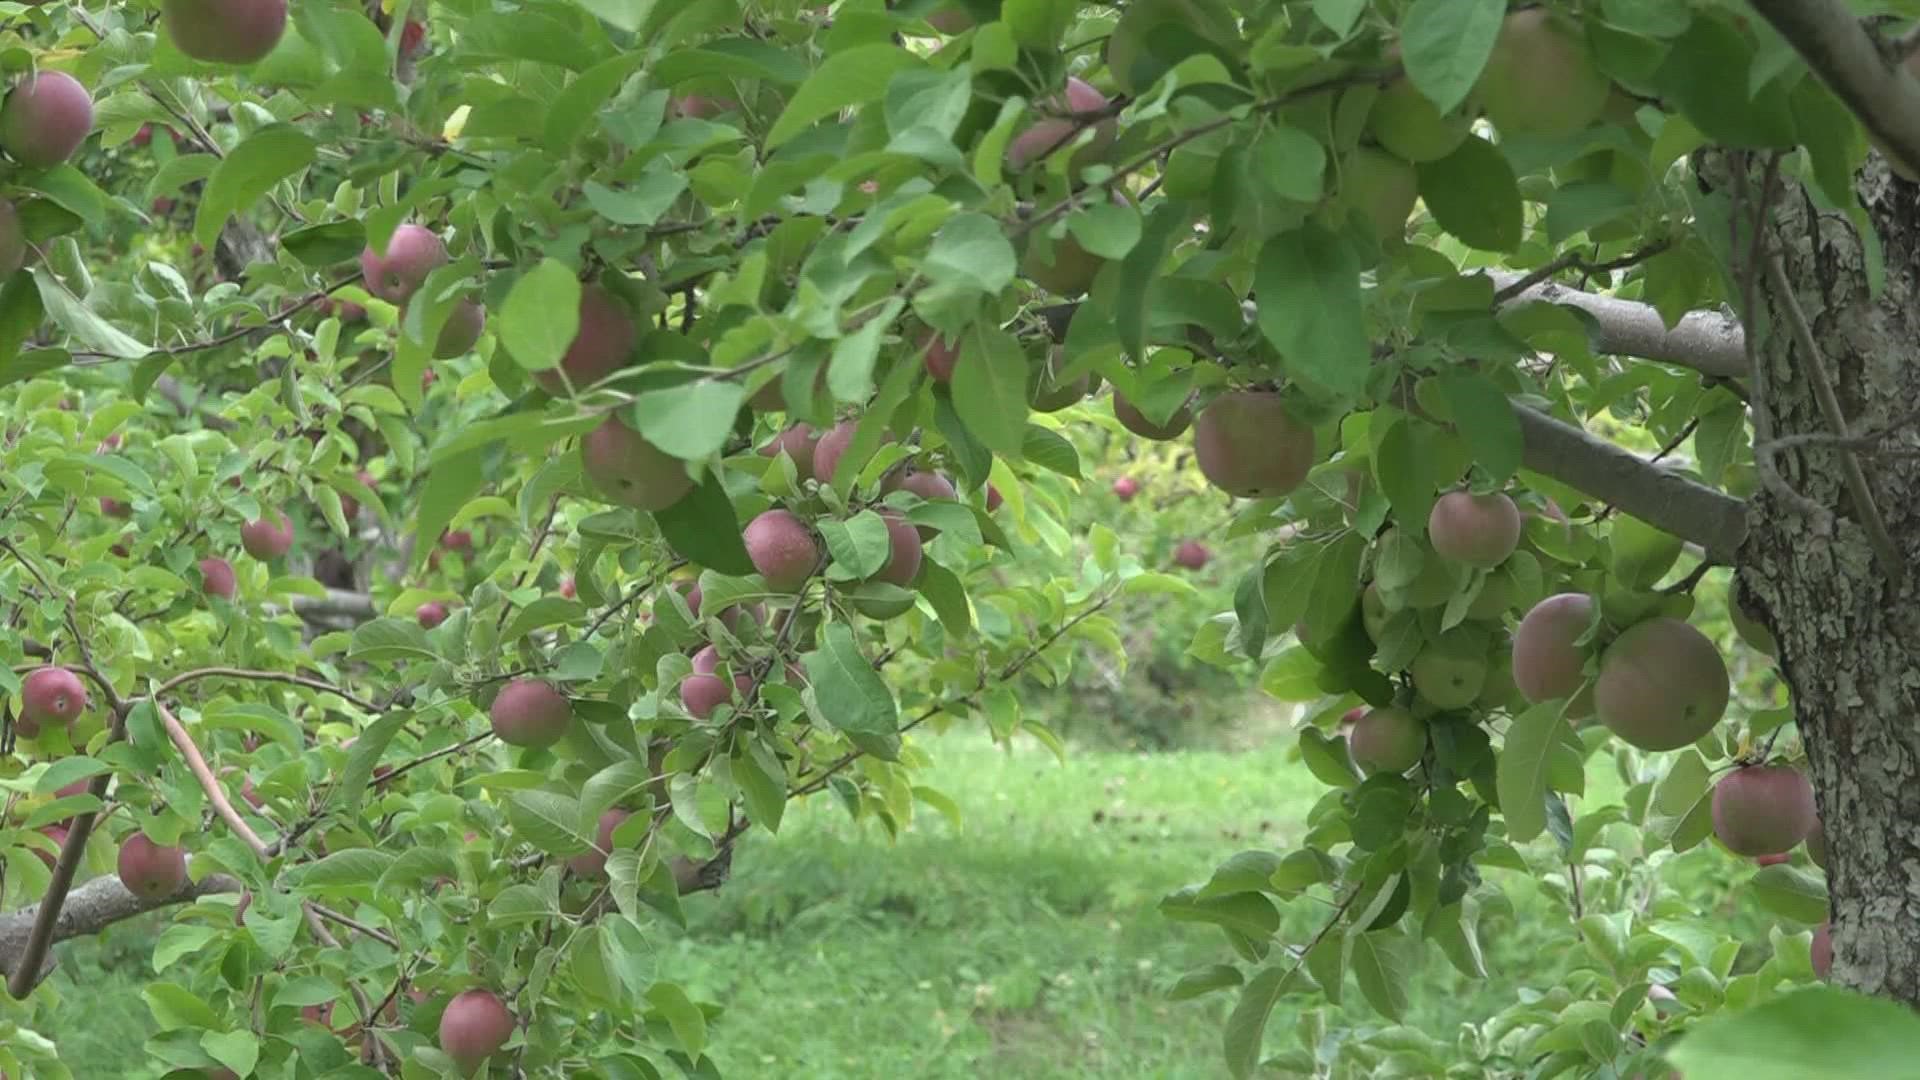 84 Maine farms produce nearly one million bushels of apples every year, according to the Maine Pomological Society.